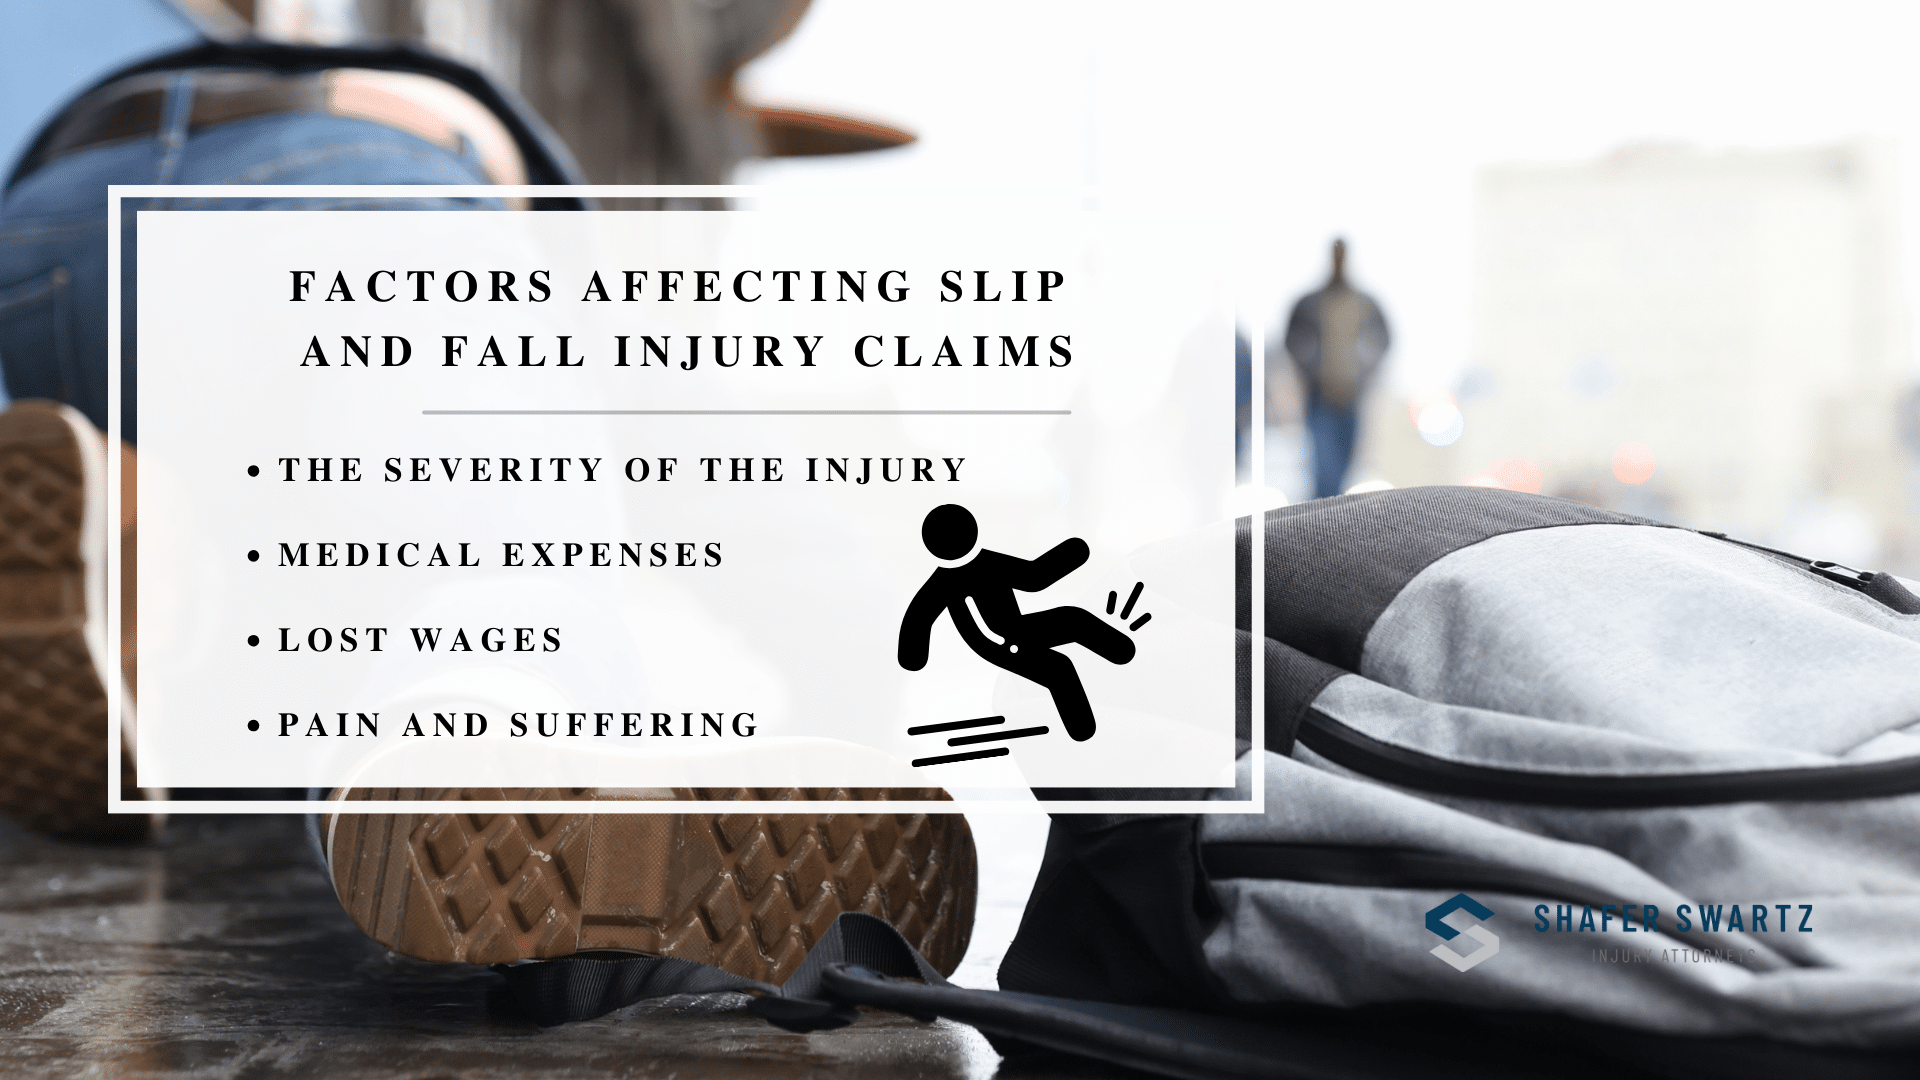 Infographic image of factors affecting slip and fall injury claims